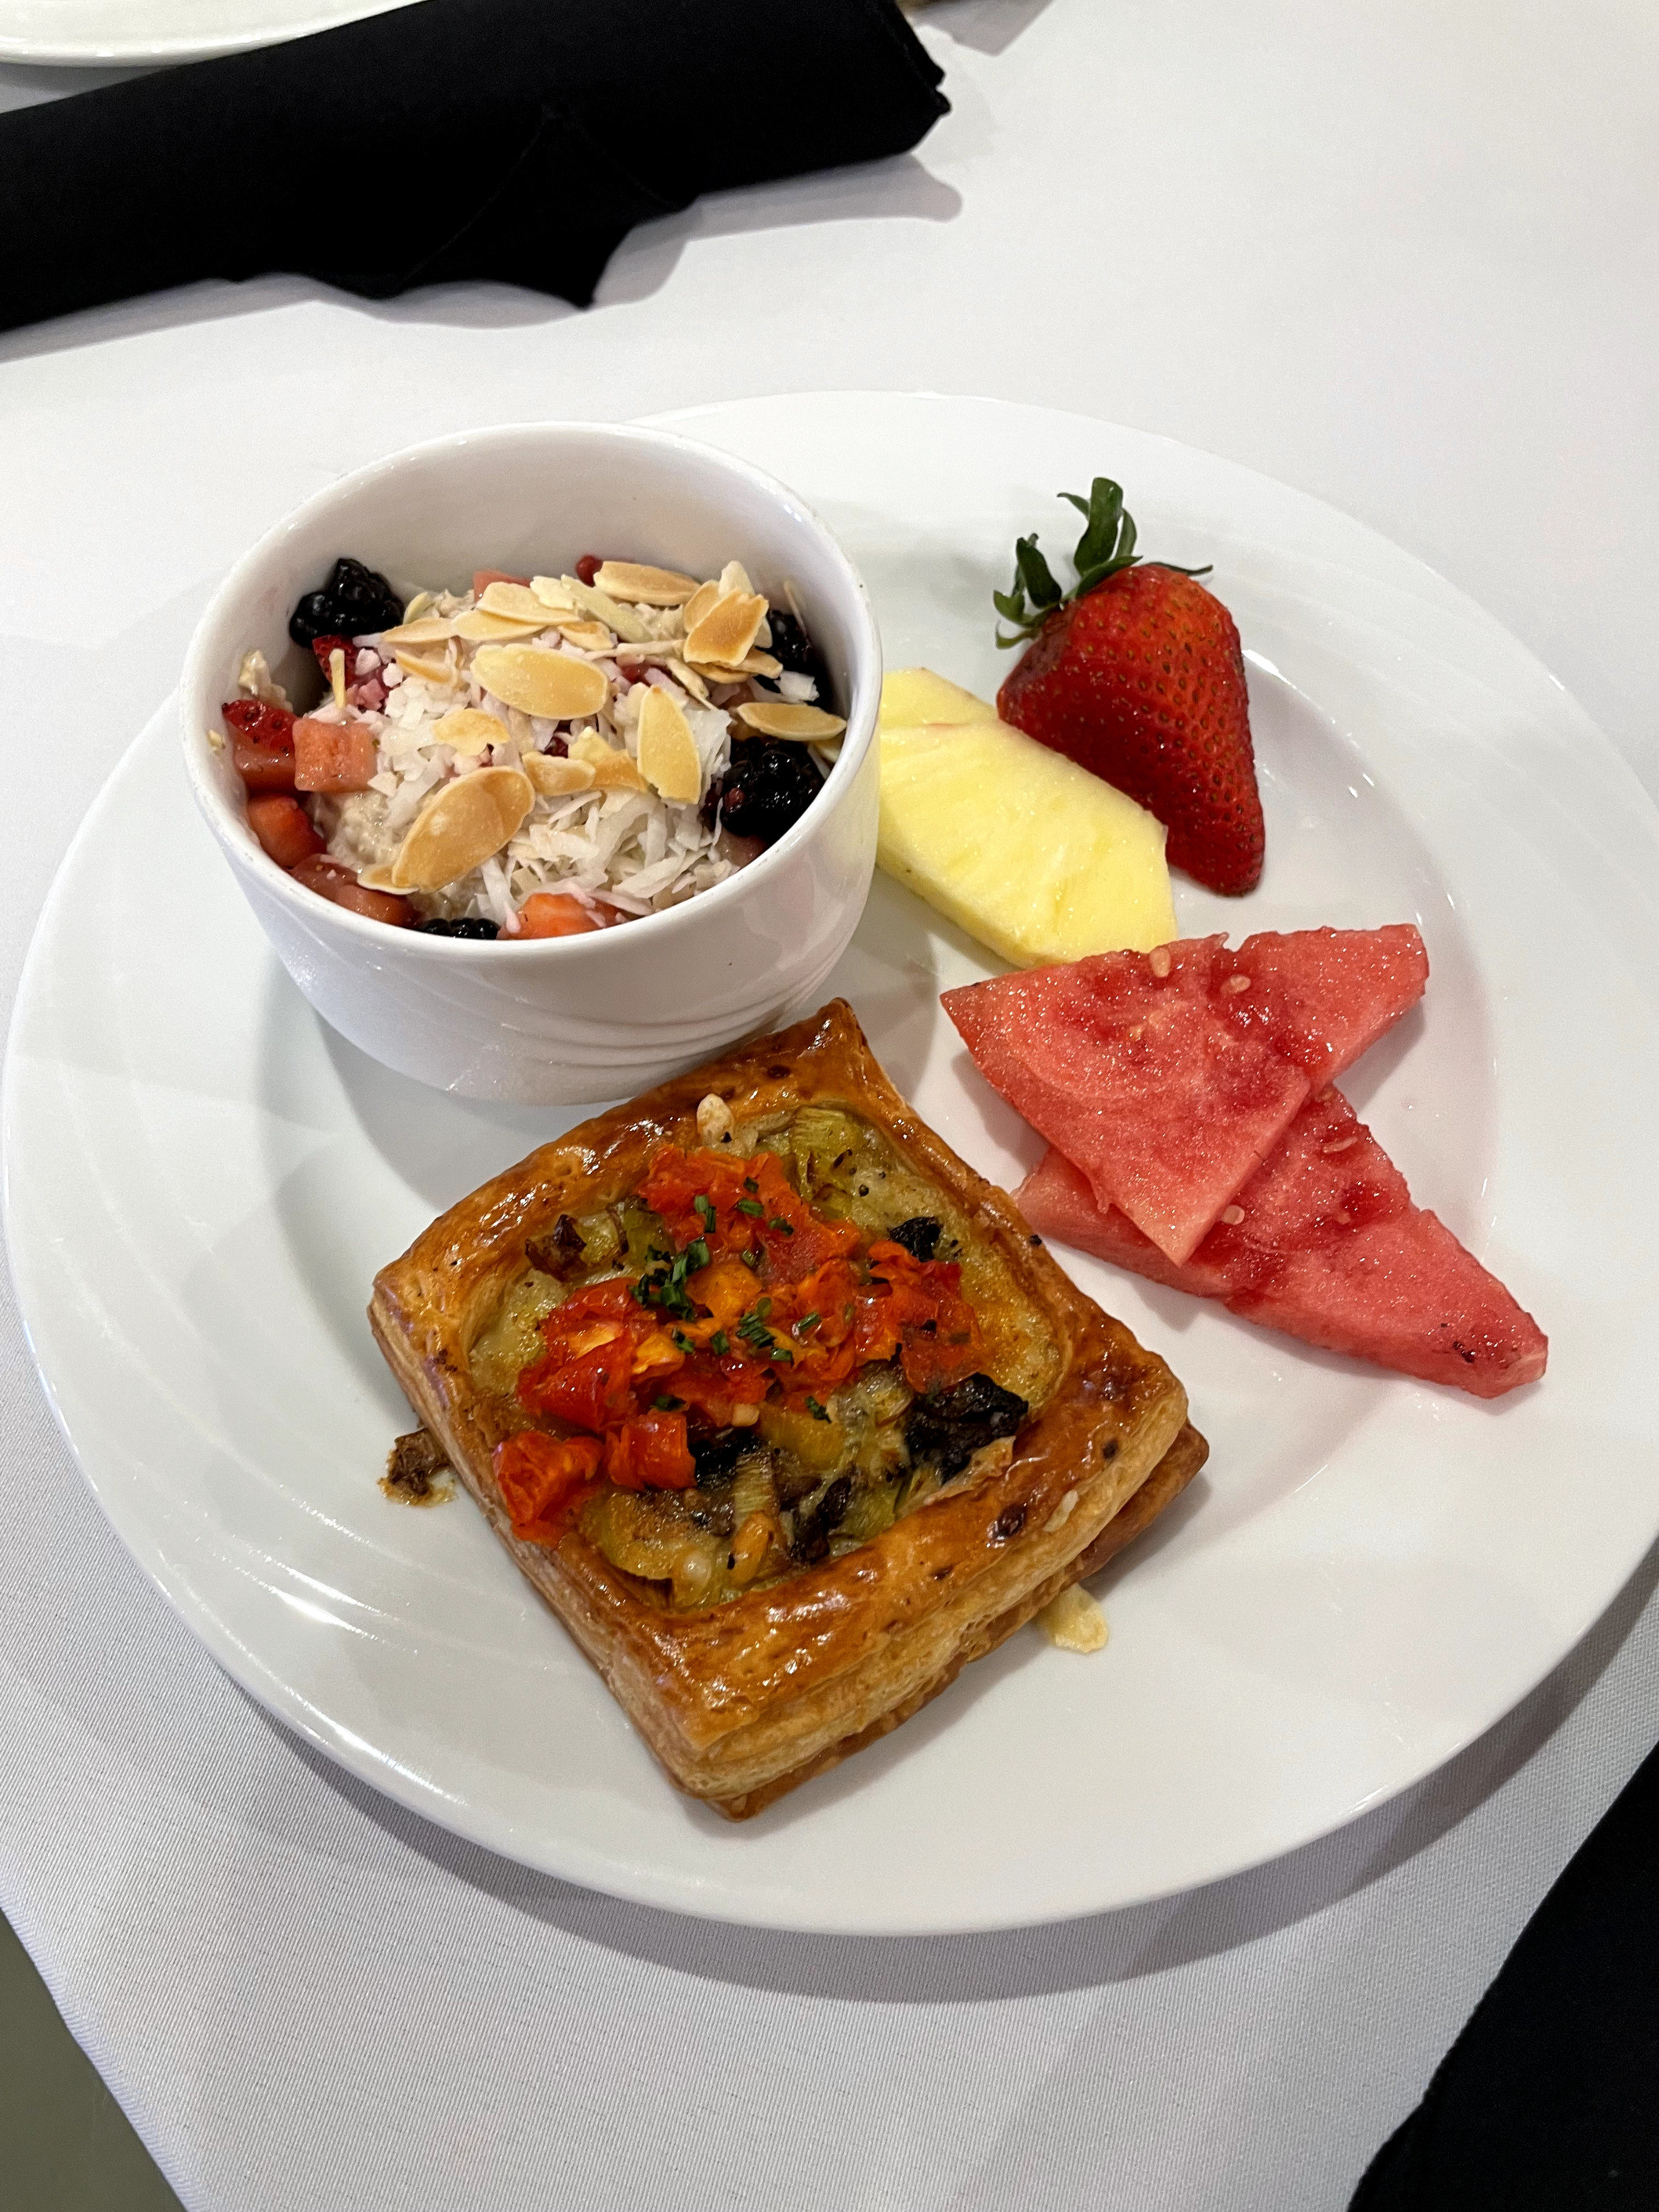 A photo of fruits and a cooked breakfast